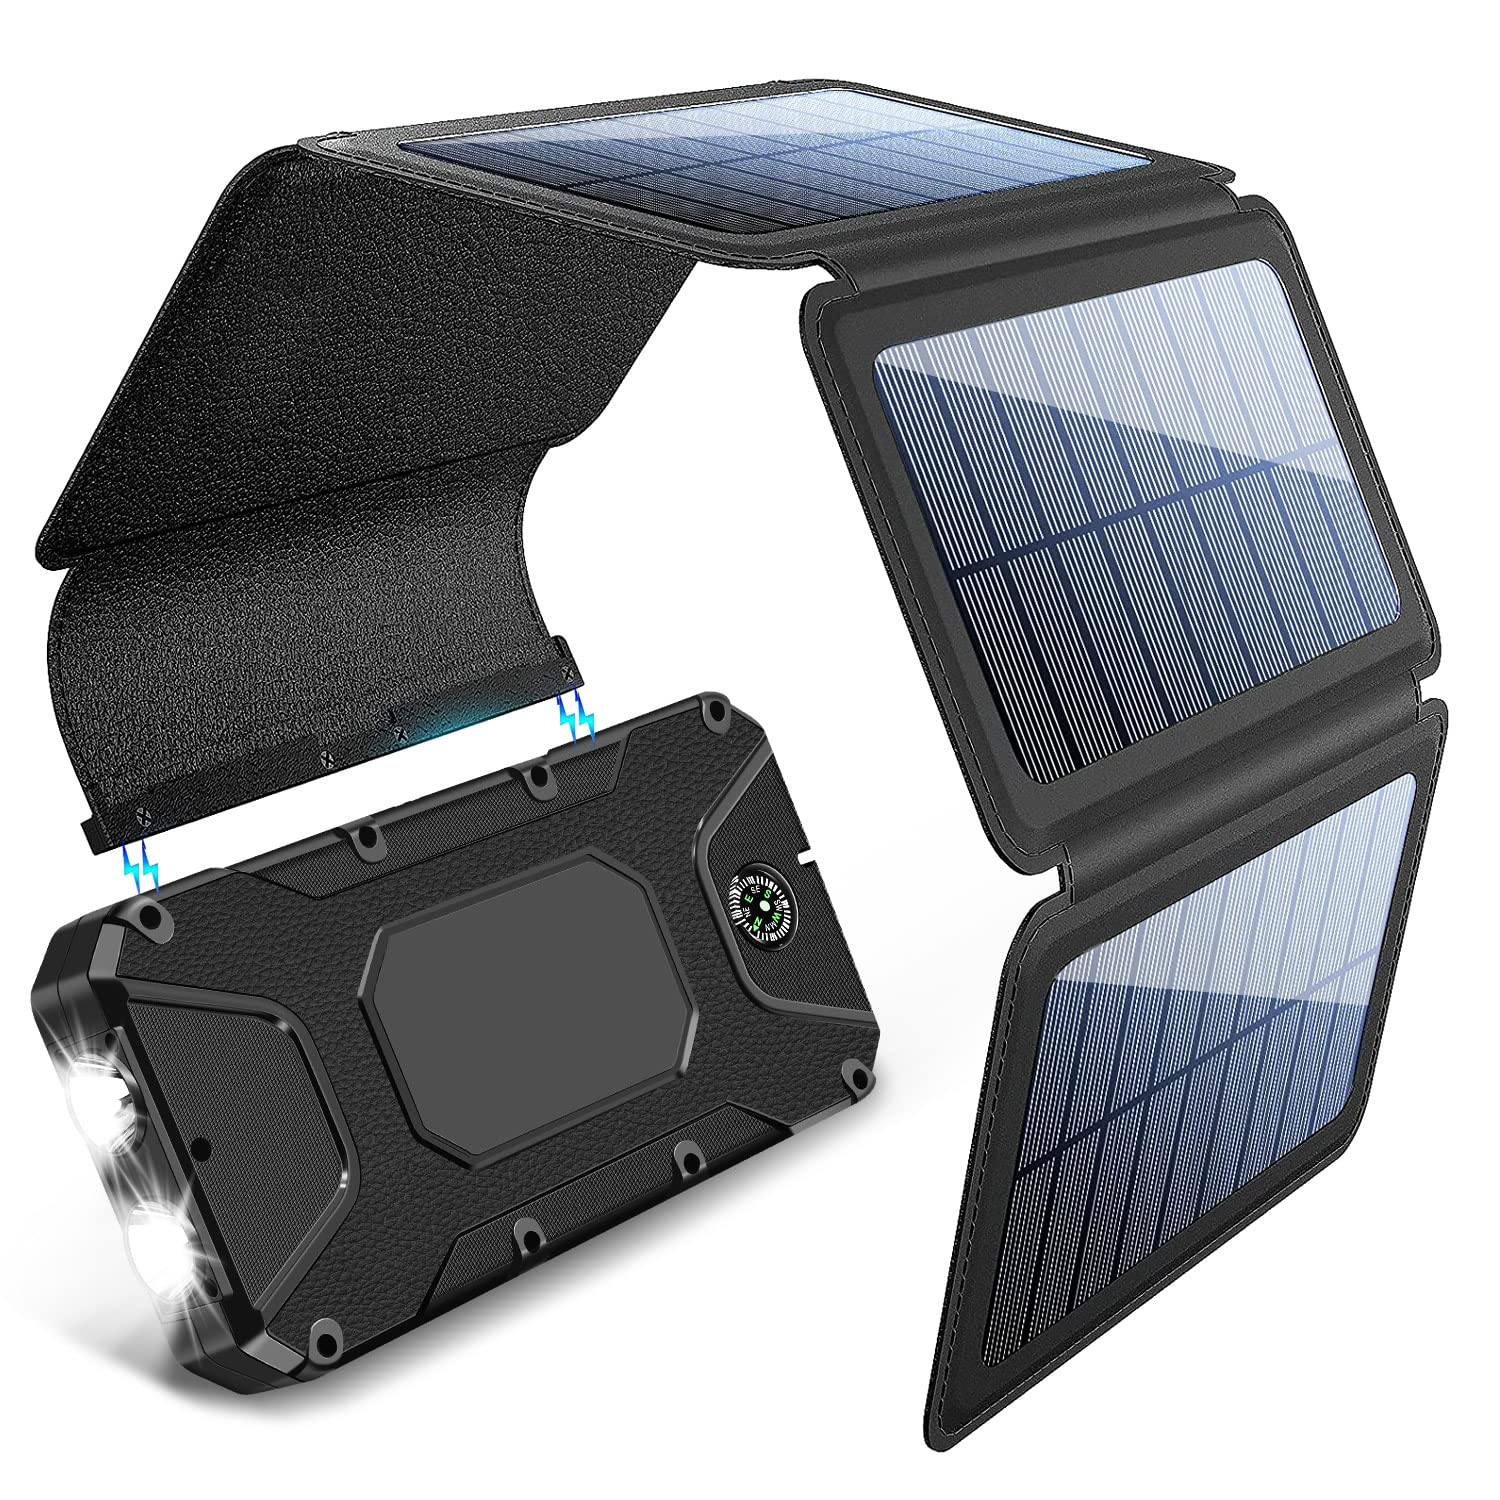 Book Cover MOSILA Portable Solar Charger Power Bank 26800mAh Huge Capacity Battery Dual Inpouts 2 USB Outputs Backup Battery with Flashlight Compass Compatible with Android Phone Tablet and Other Smart Devices